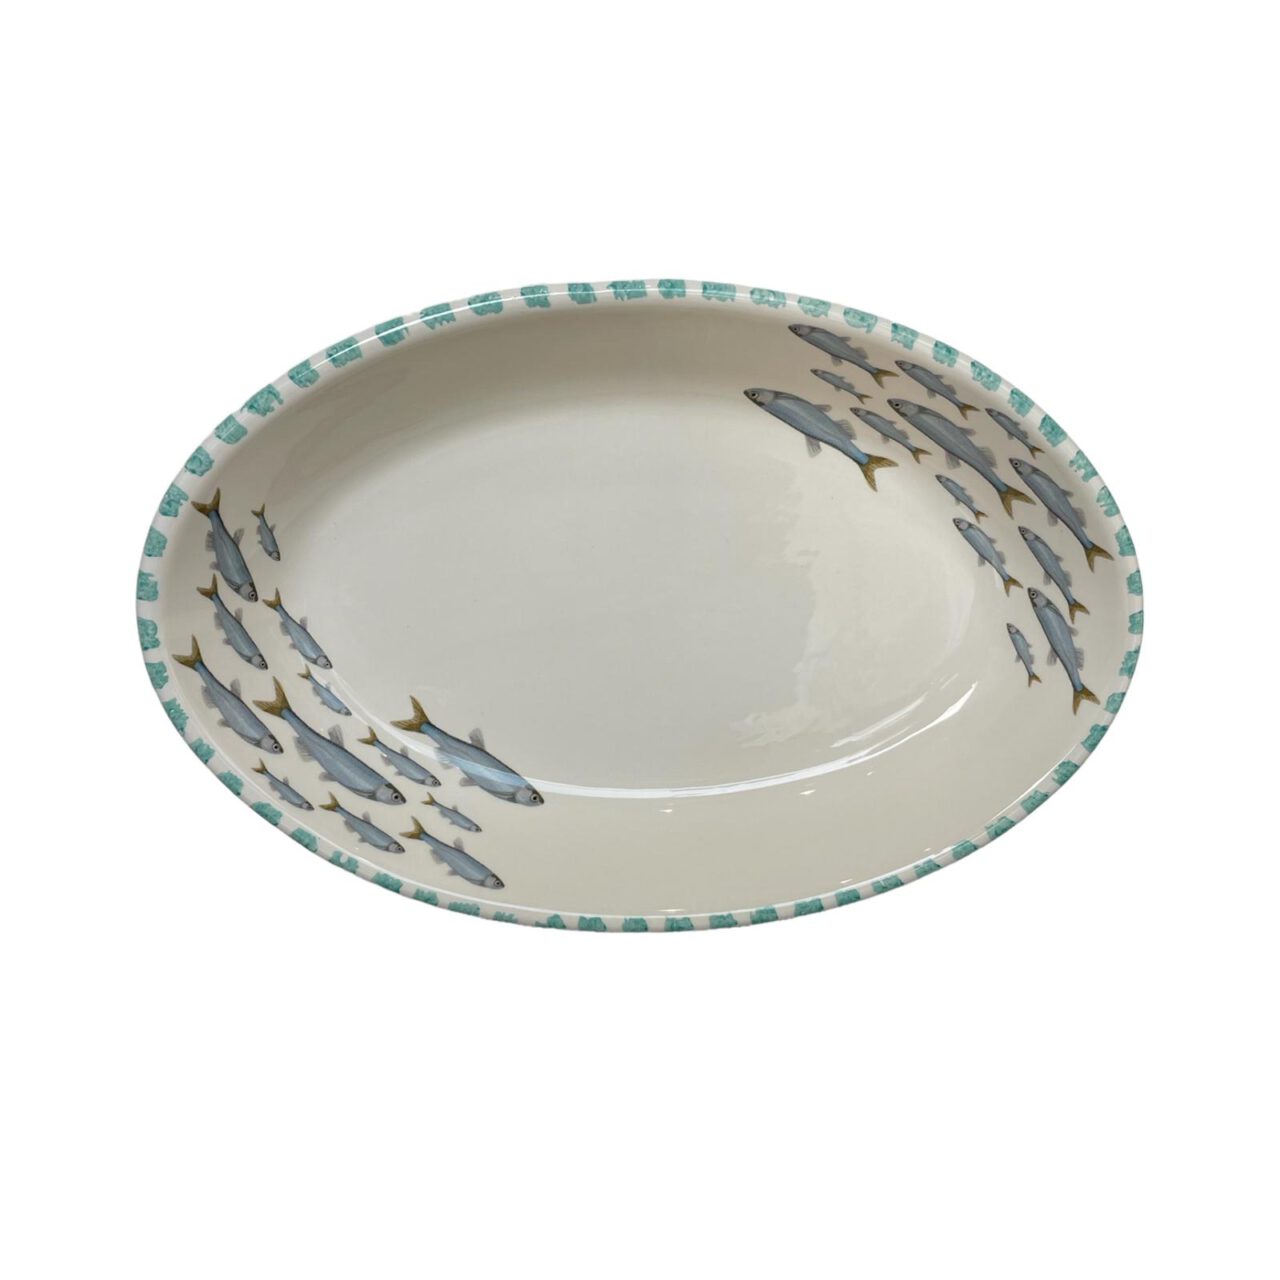 School fish Oval Serving plate